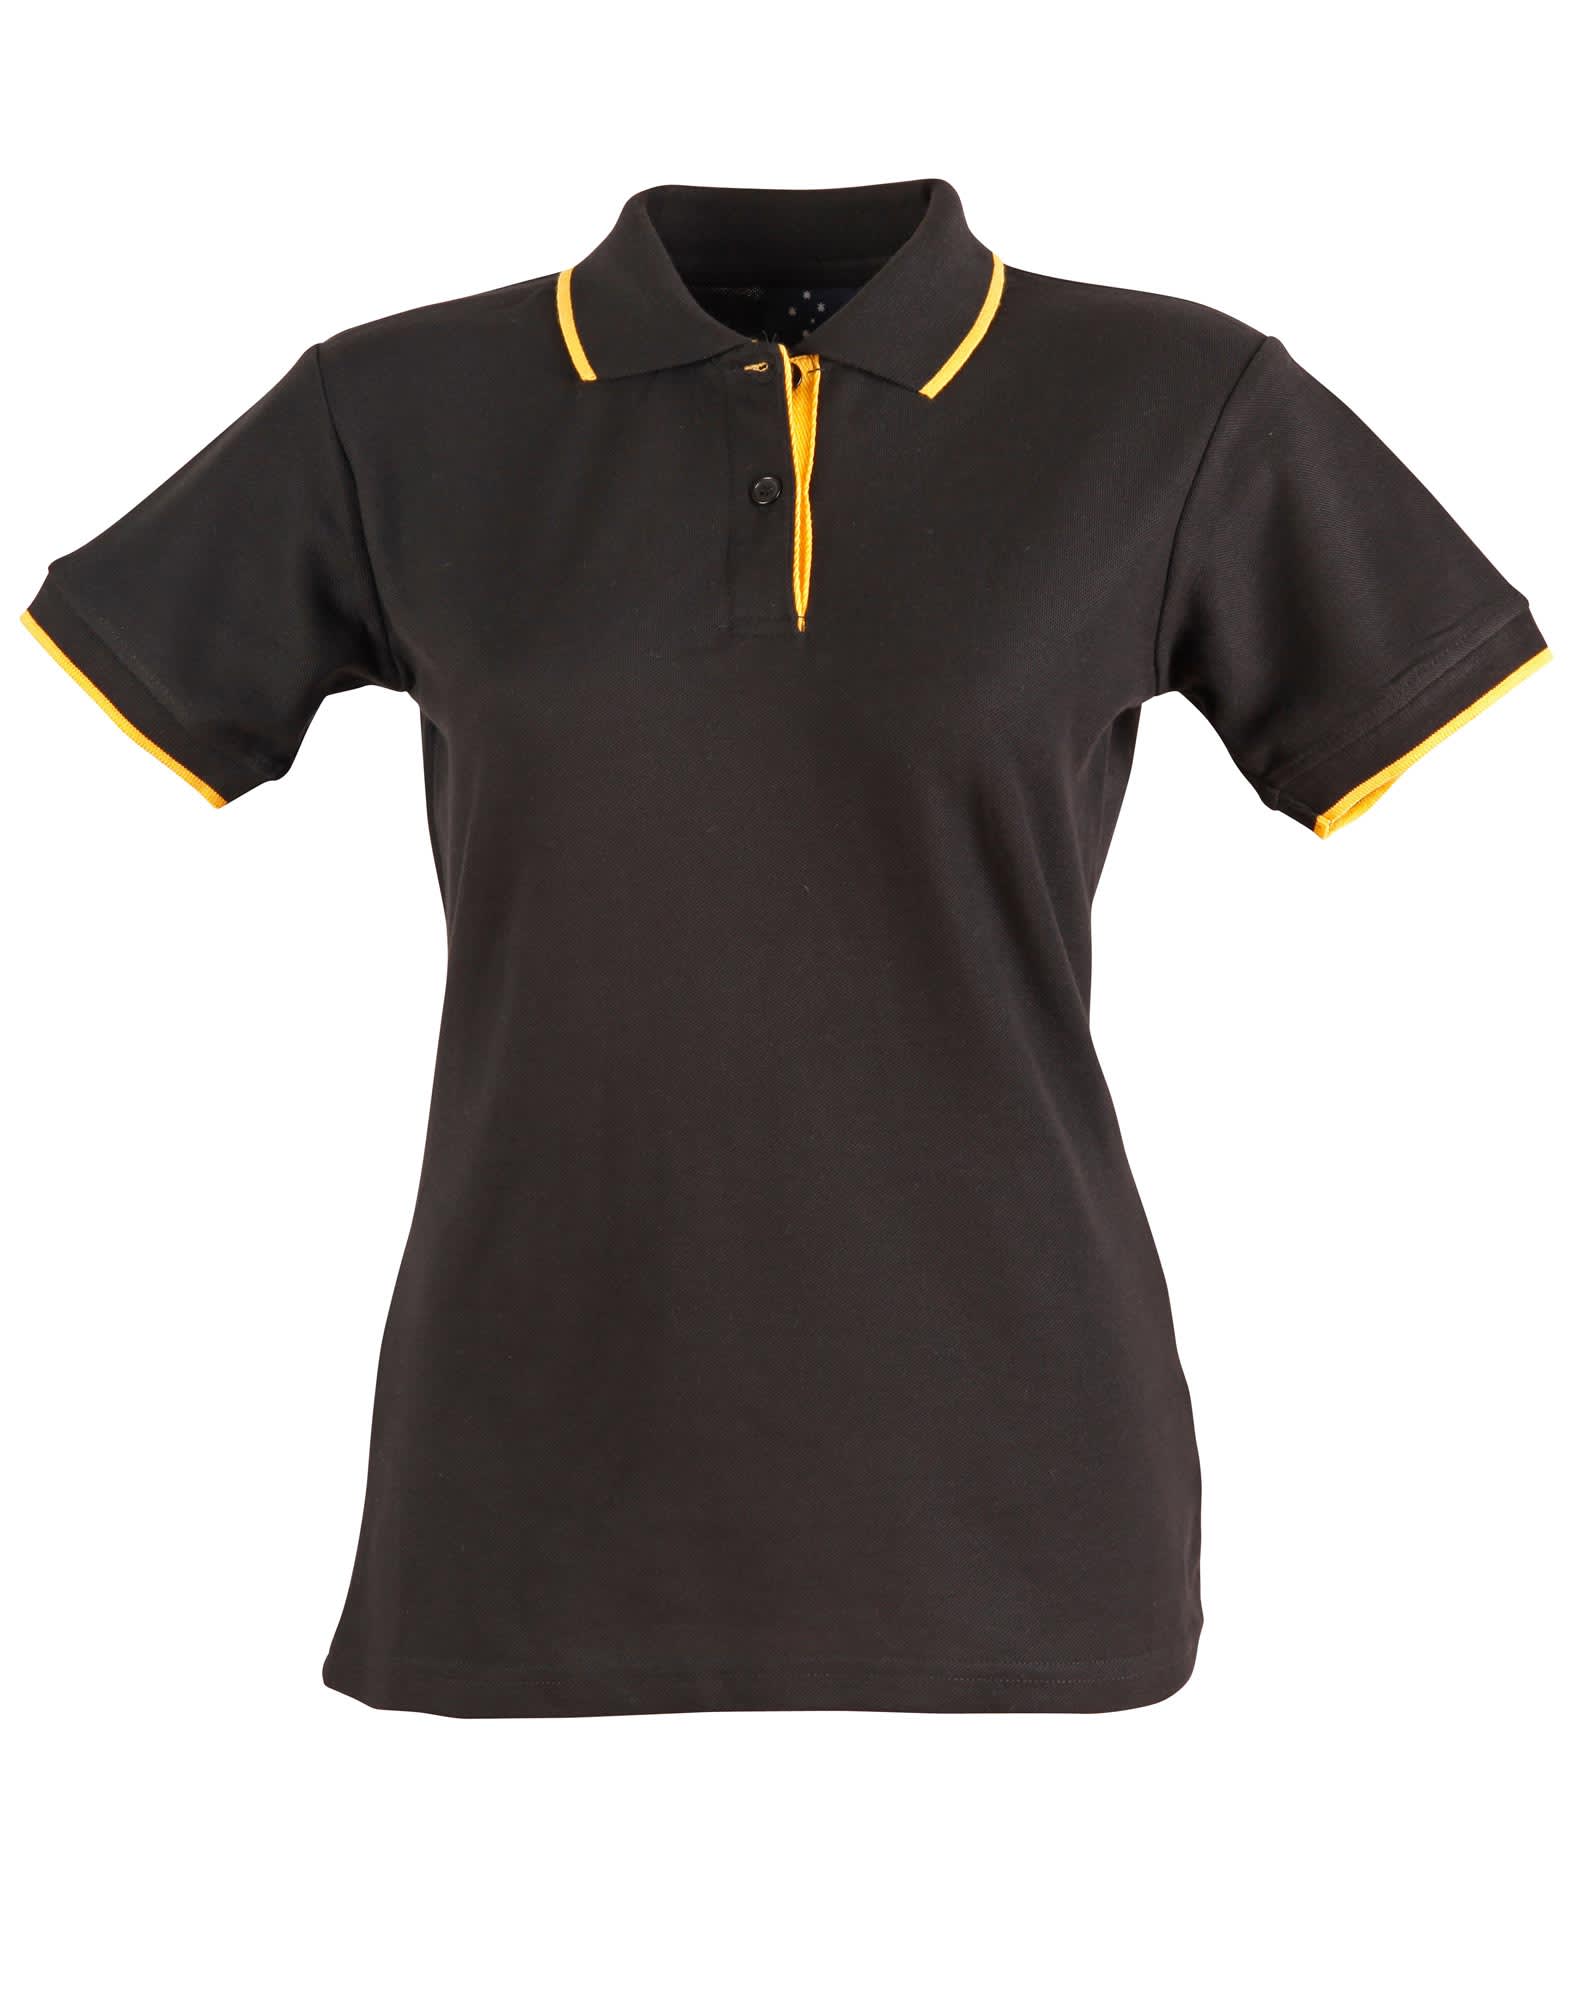 Ladies Poly/Cotton Contrast Pique Short Sleeve Polo PS48A | Black/Gold